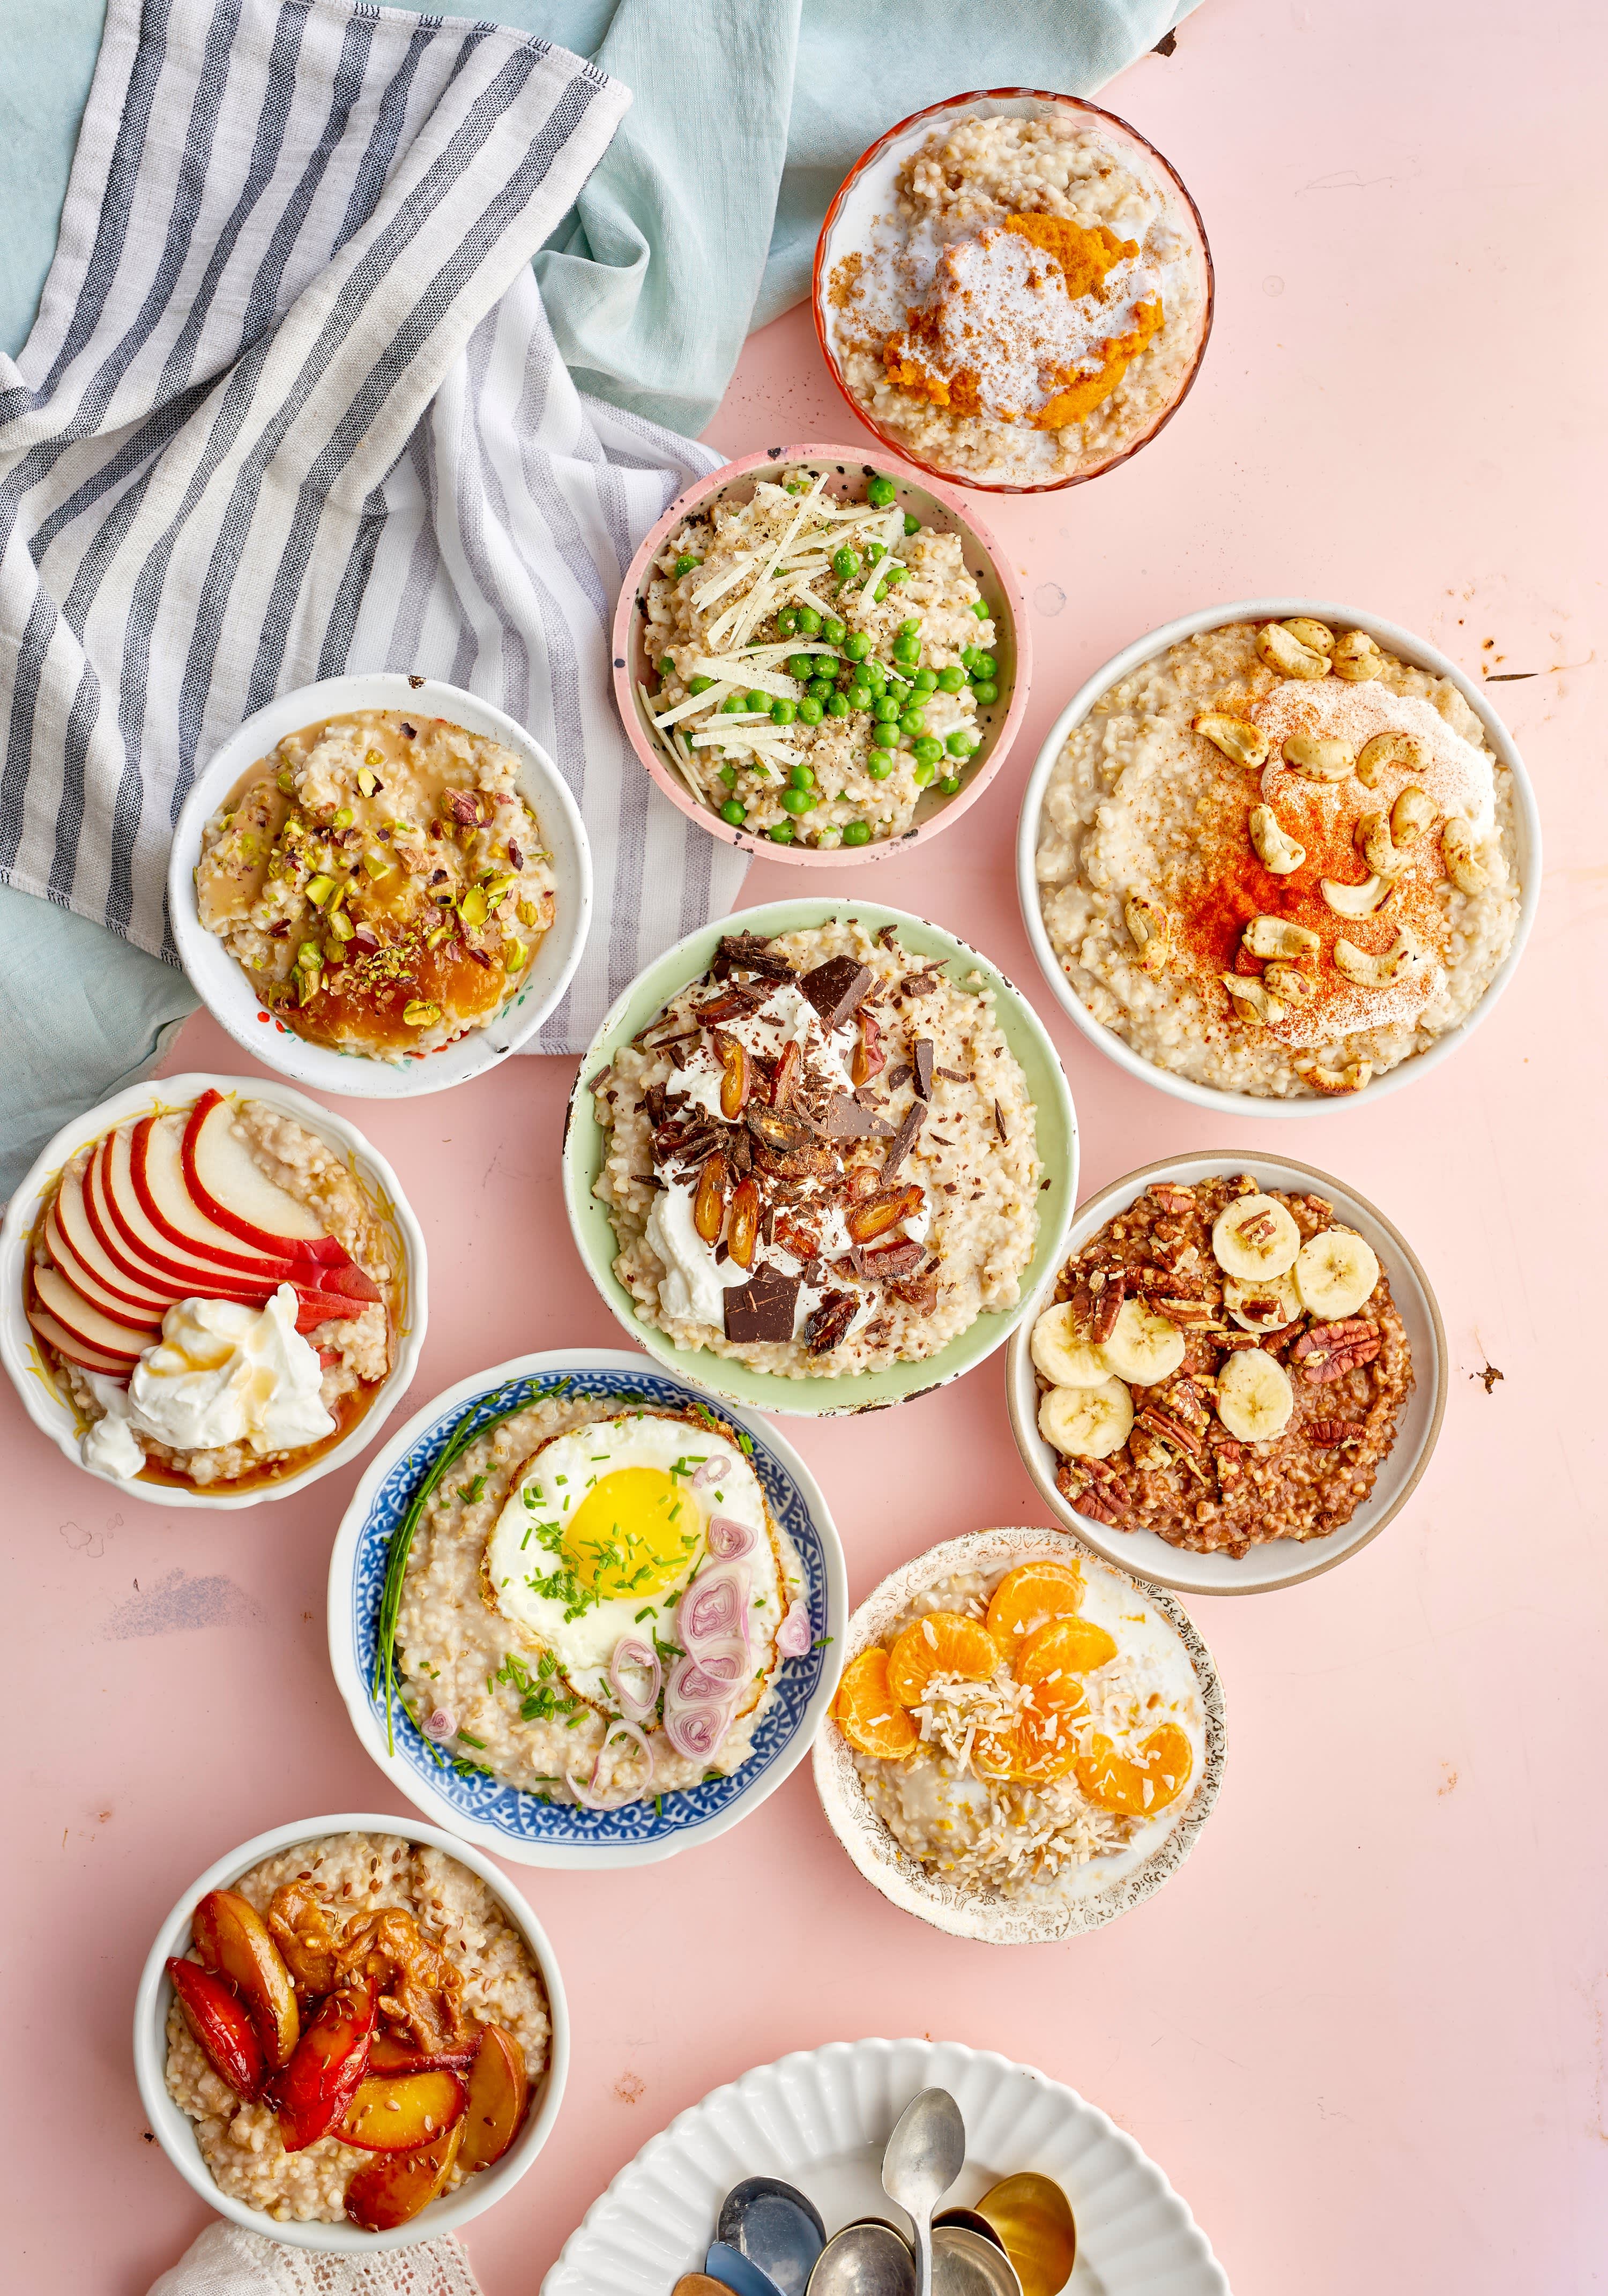 10 Sweet & Savory Ways to Top Your Morning Oatmeal | Kitchn